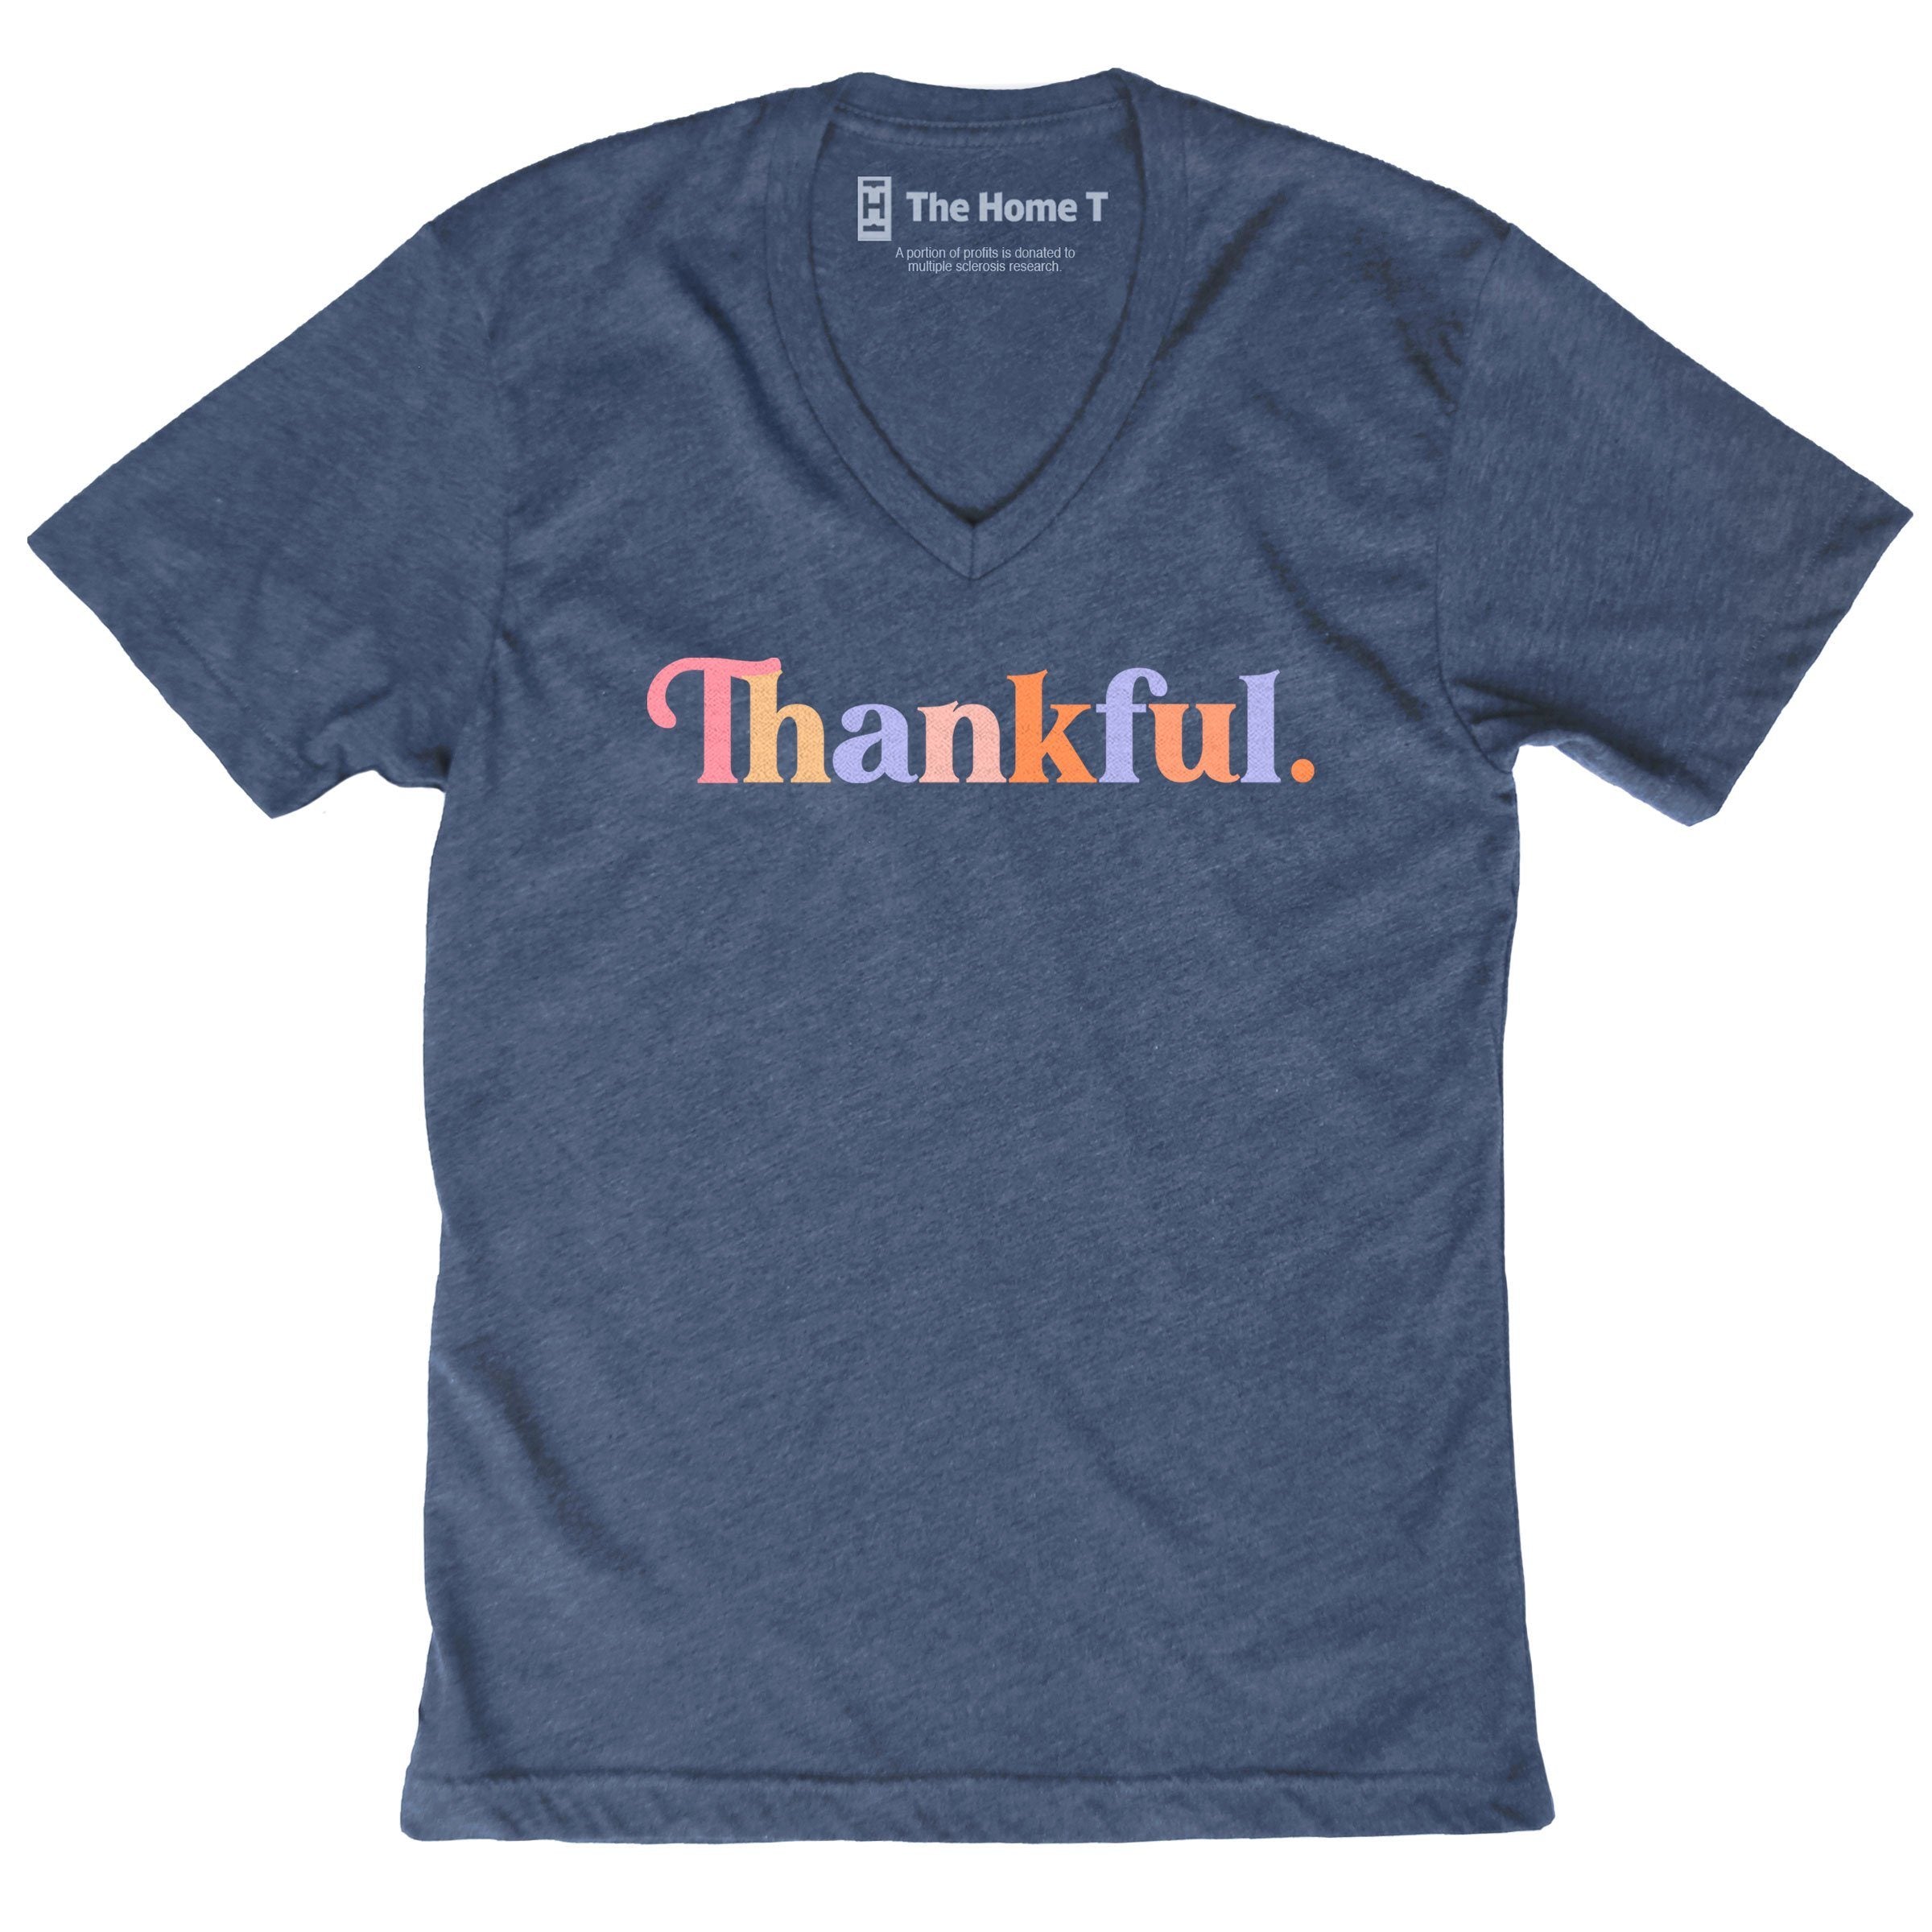 Thankful The Home T XS V Neck